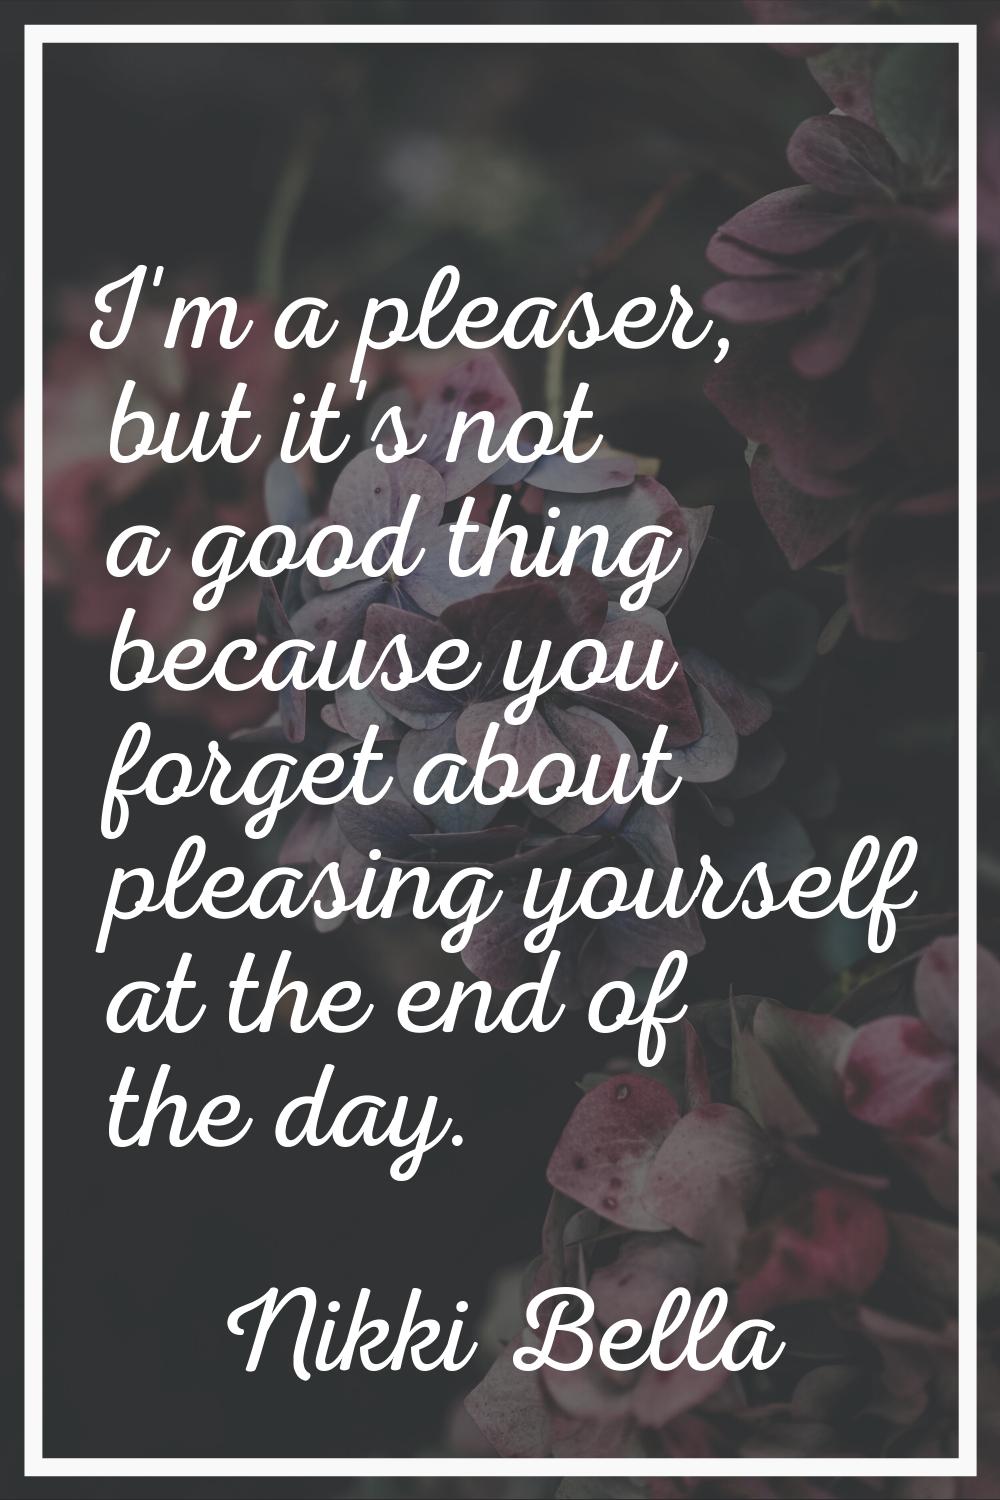 I'm a pleaser, but it's not a good thing because you forget about pleasing yourself at the end of t